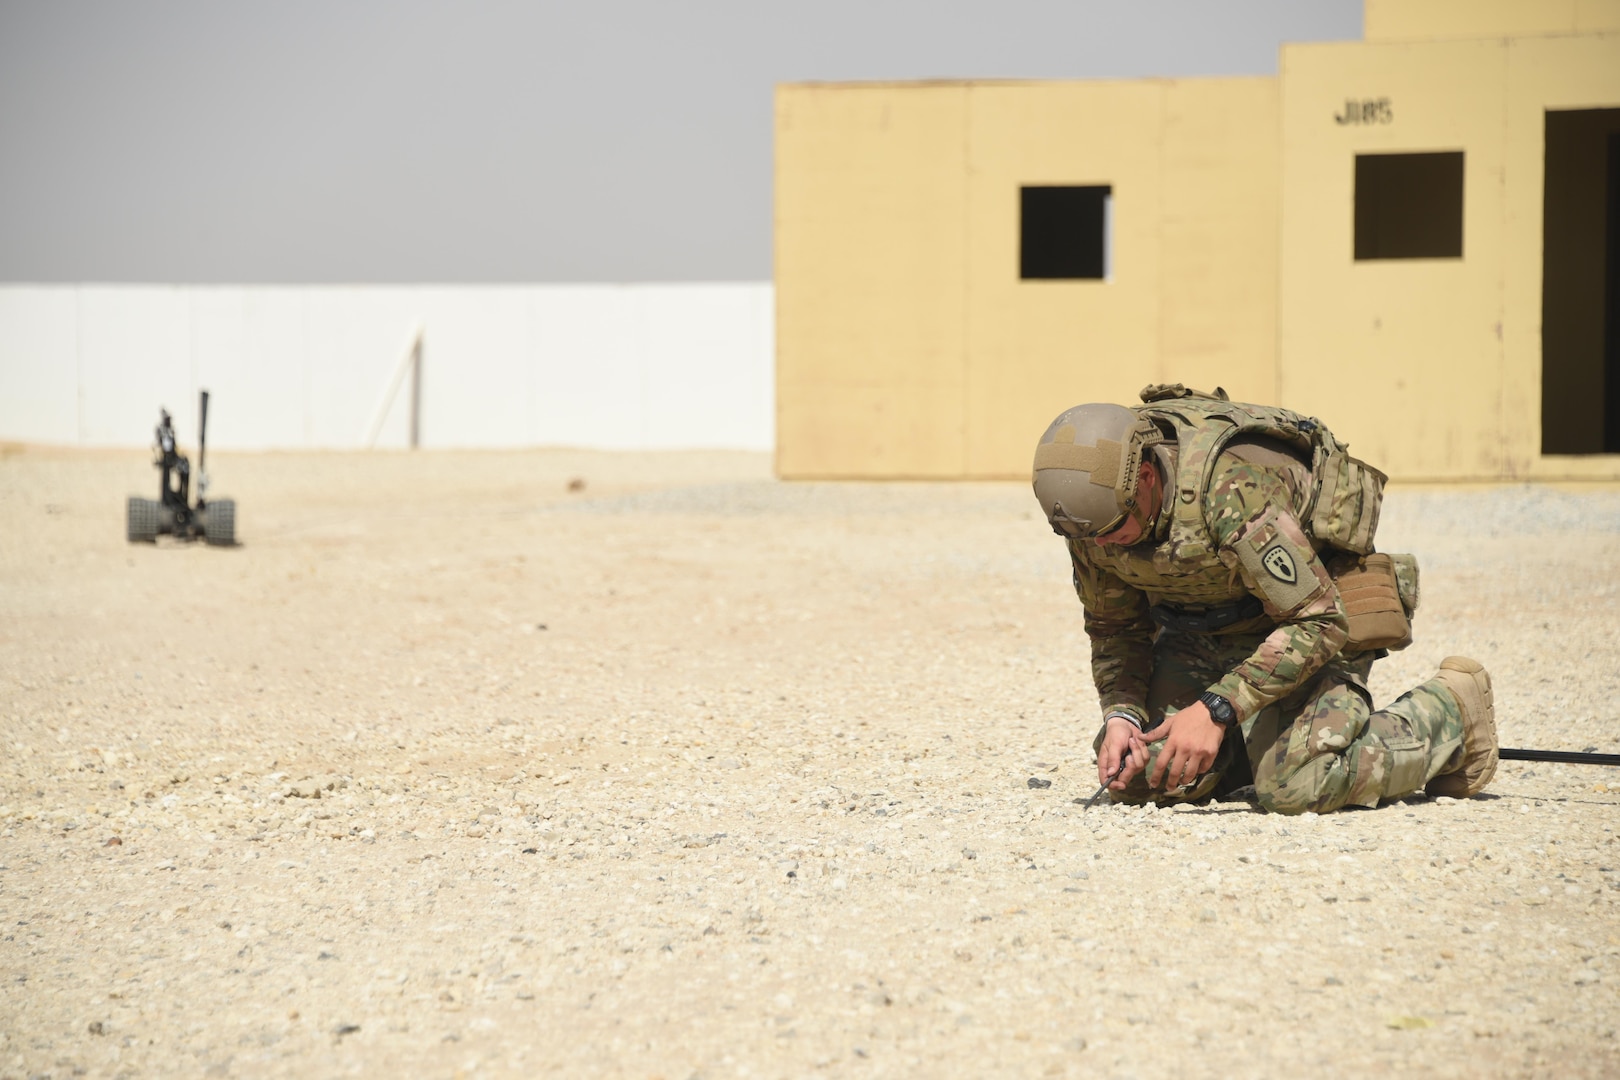 An Army explosive ordnance disposal technician, assigned to the 630th EOD Company, performs counter improvised explosive device techniques during a joint service EOD field training exercise at an undisclosed location in Southwest Asia, May 23, 2017. EOD teams from each of the four service branches, deployed to five different countries across the AOR, gathered for joint service EOD training, which allowed for the exchange of tactics, techniques and procedures between service branches. (U.S. Air Force photo/Tech. Sgt. Jonathan Hehnly)